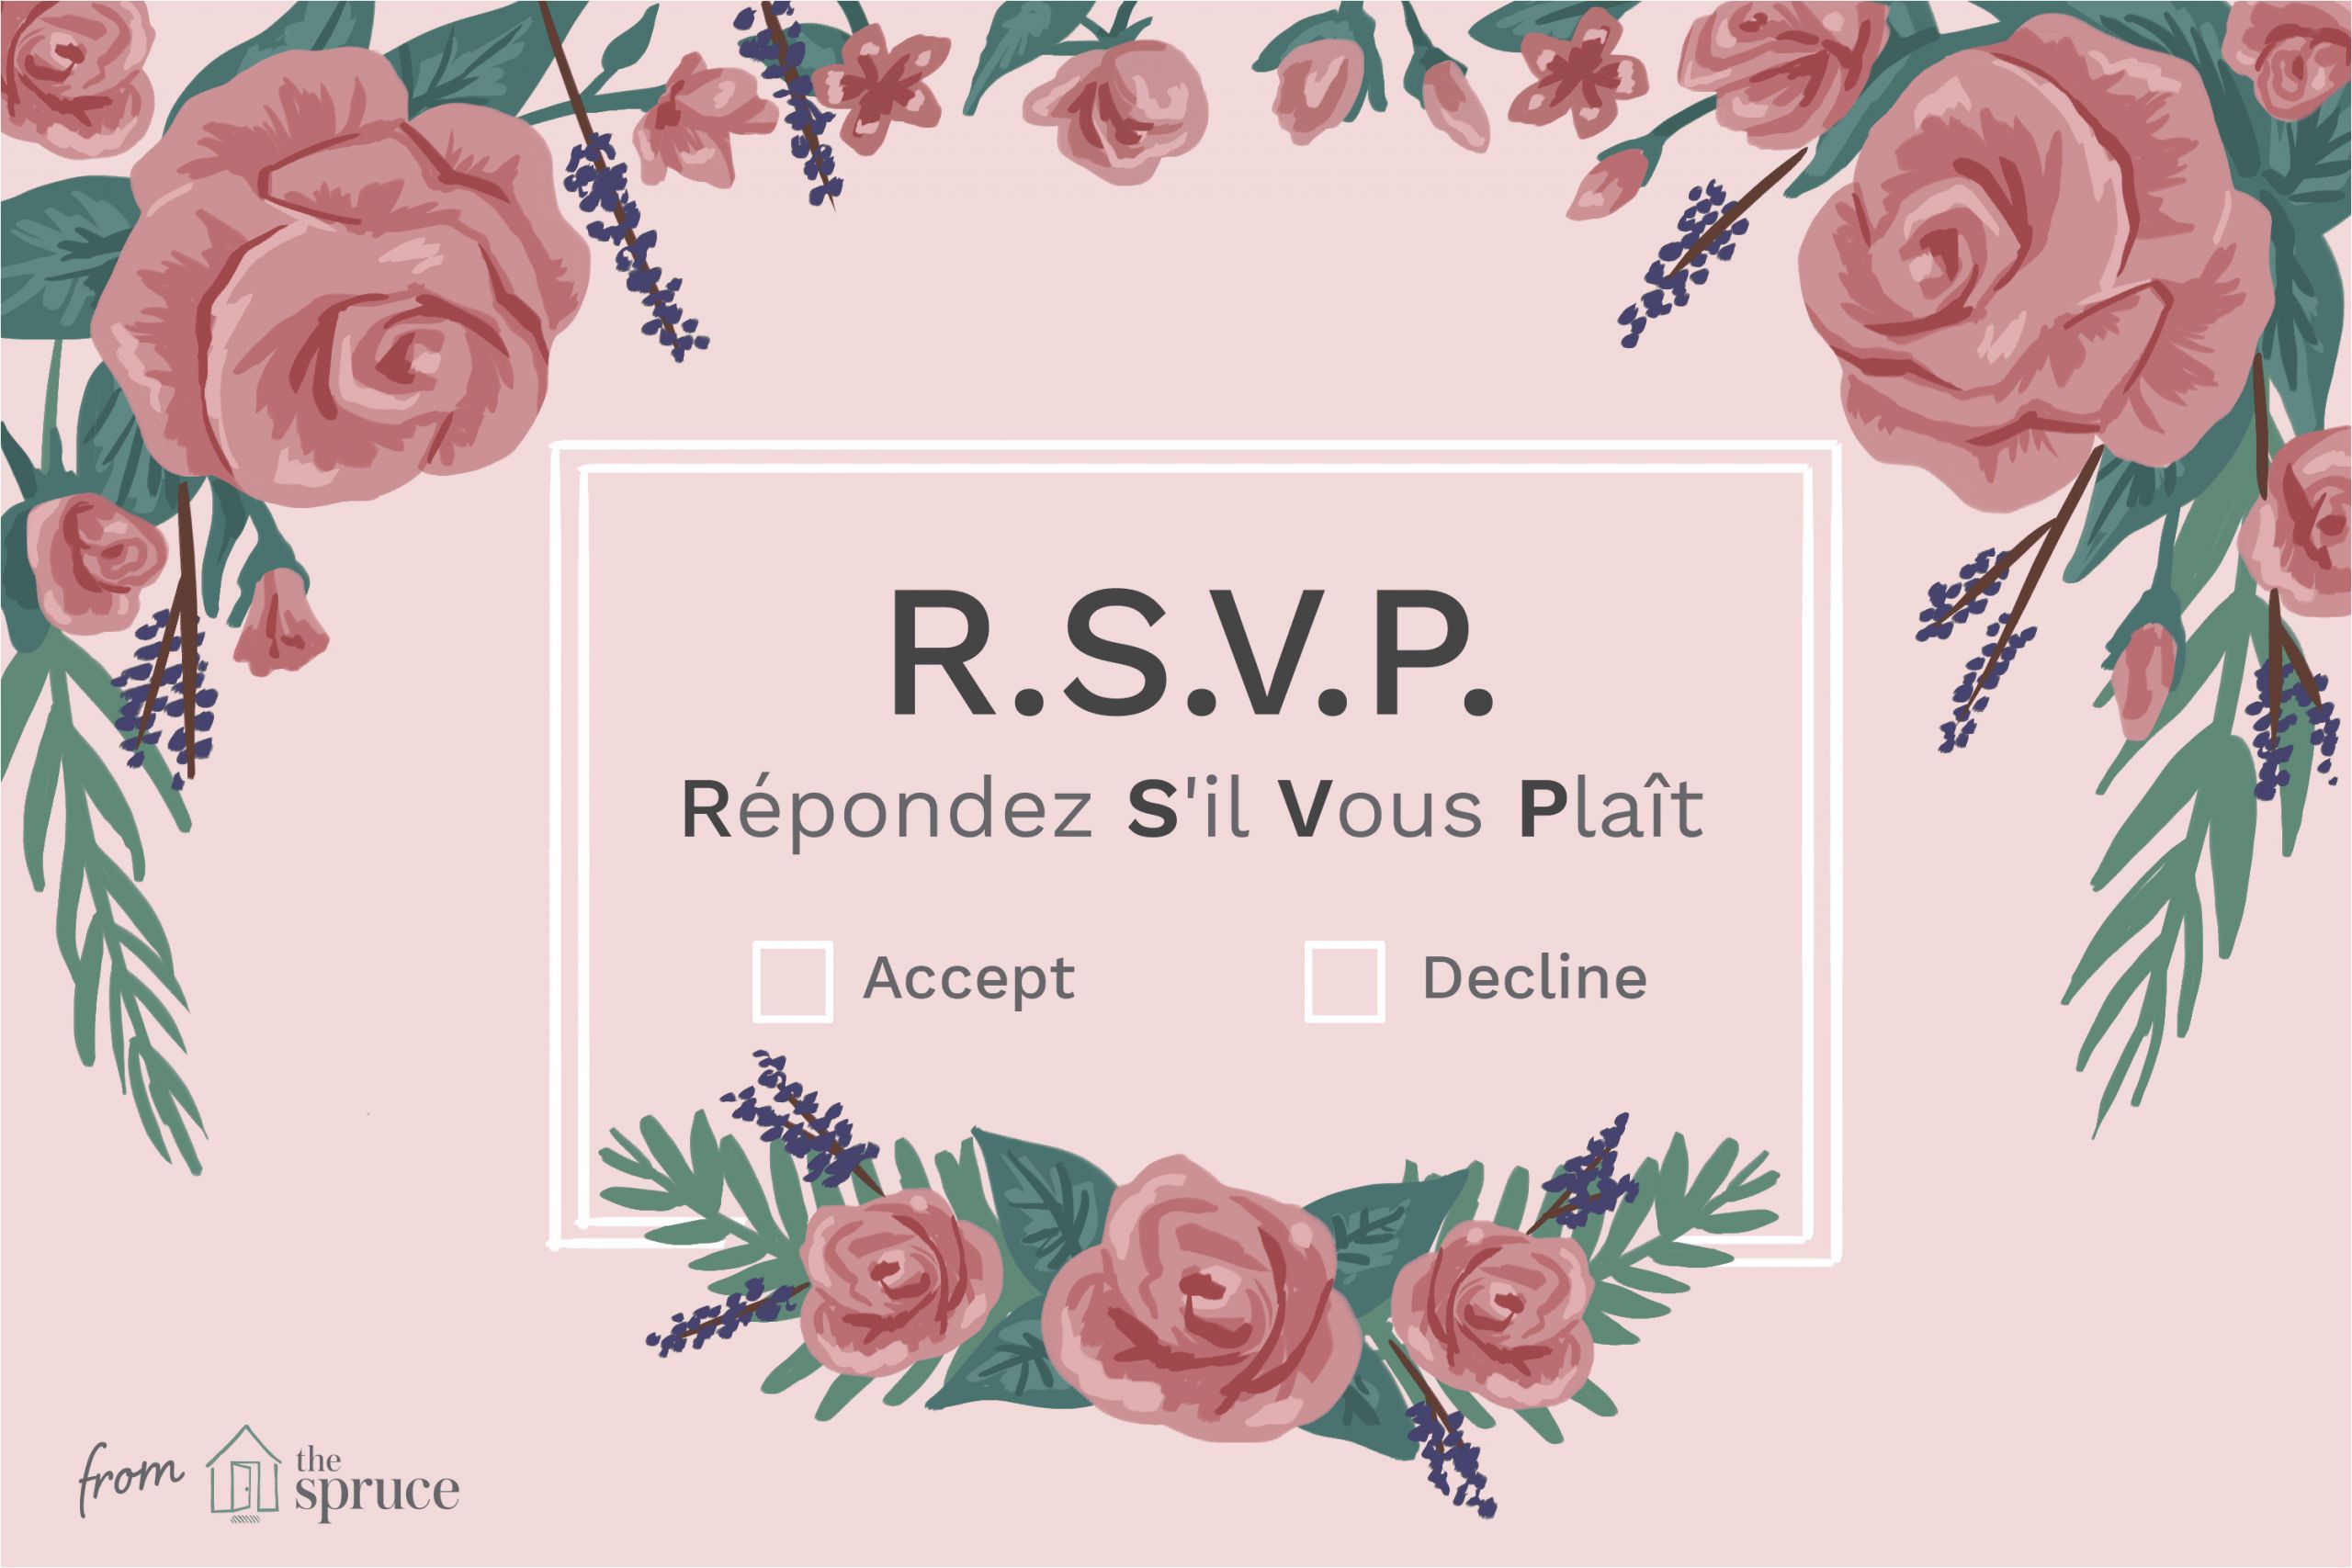 What is the Full form Of Rsvp In Marriage Card What Does Rsvp Mean On An Invitation